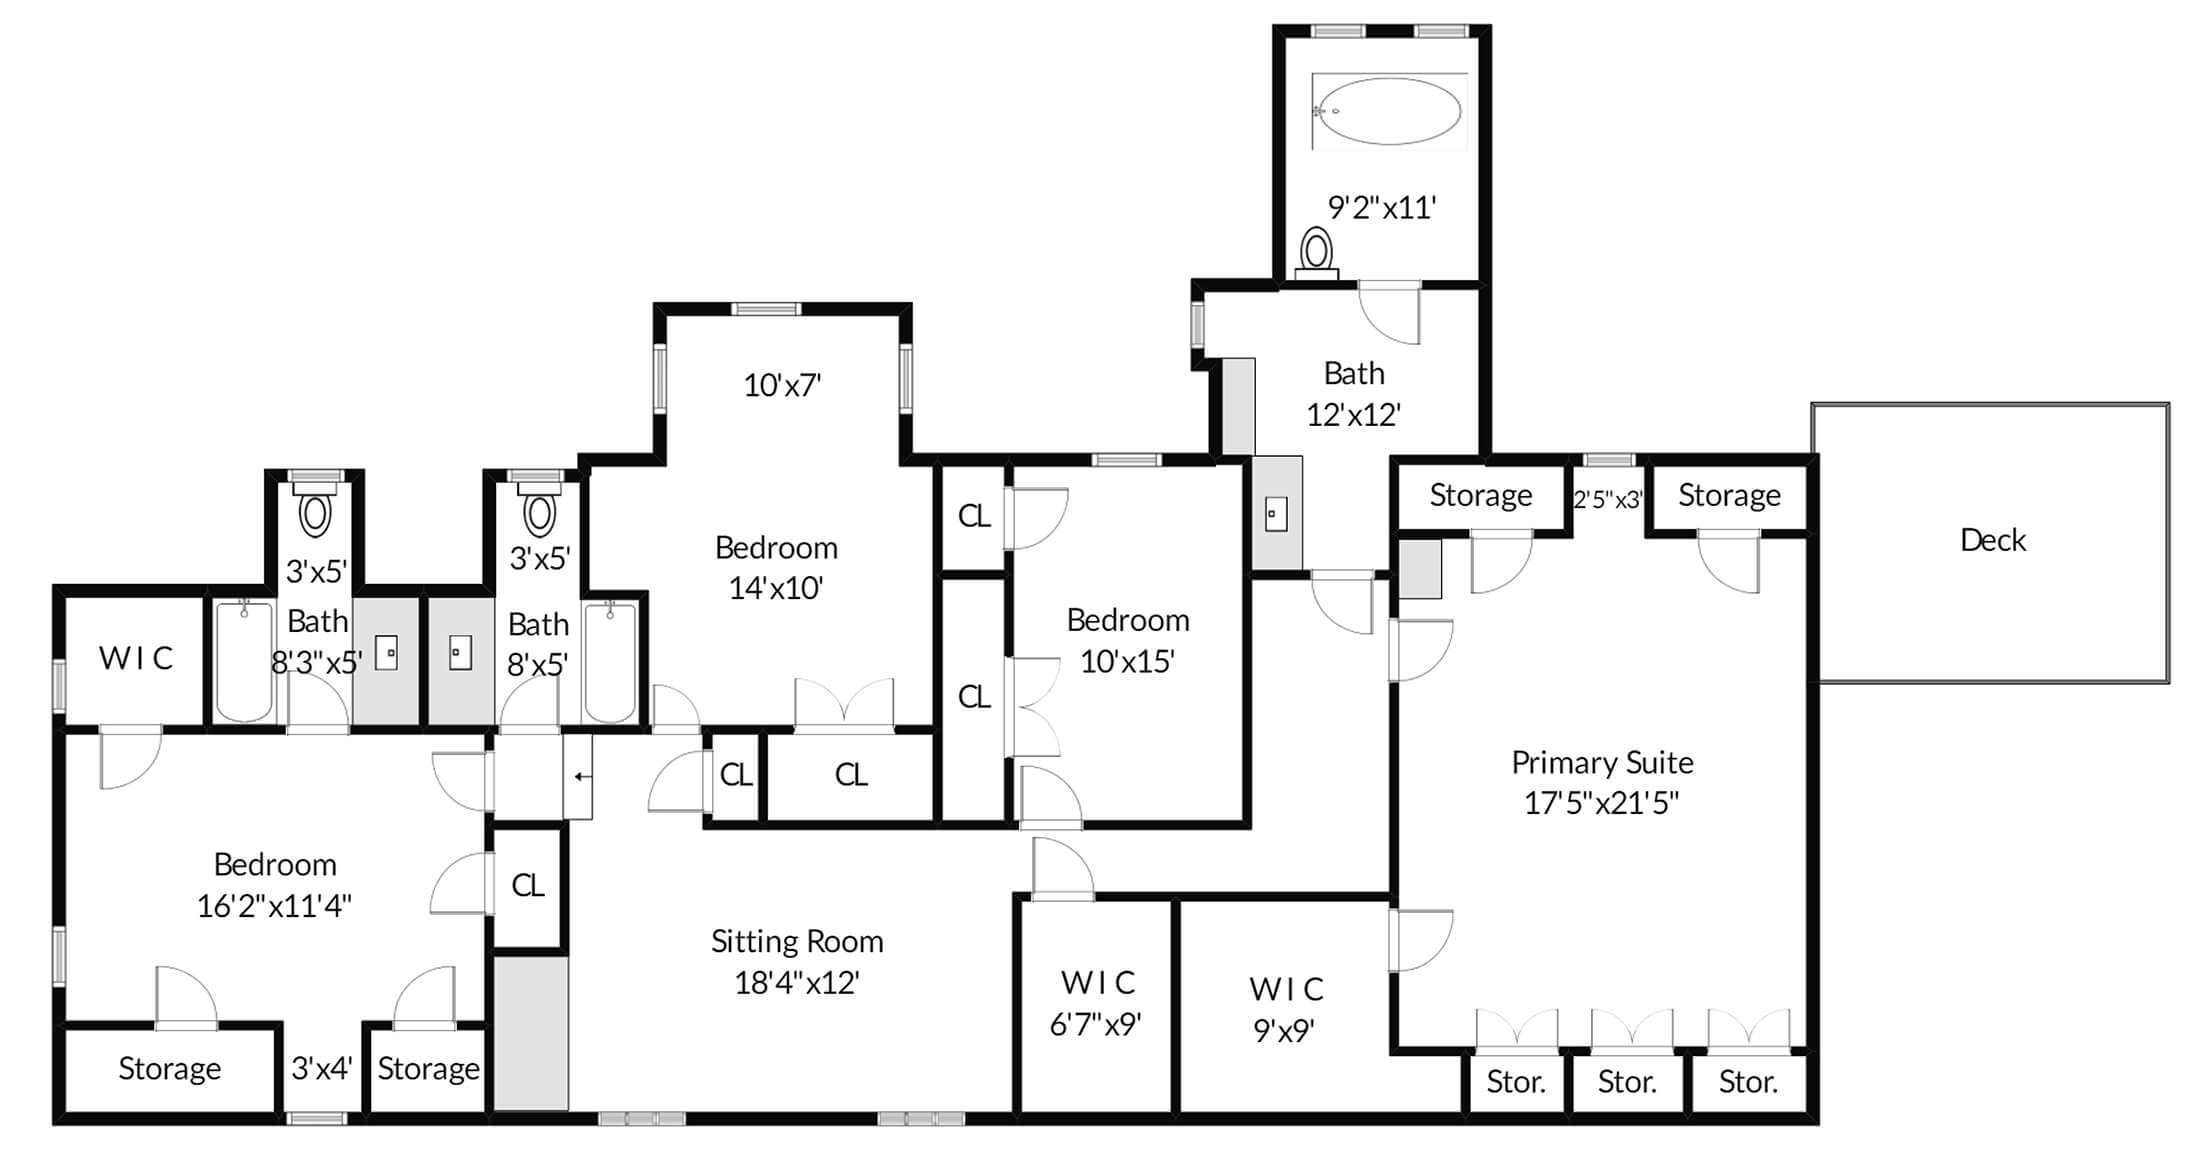 floorplan for the first floor of the house